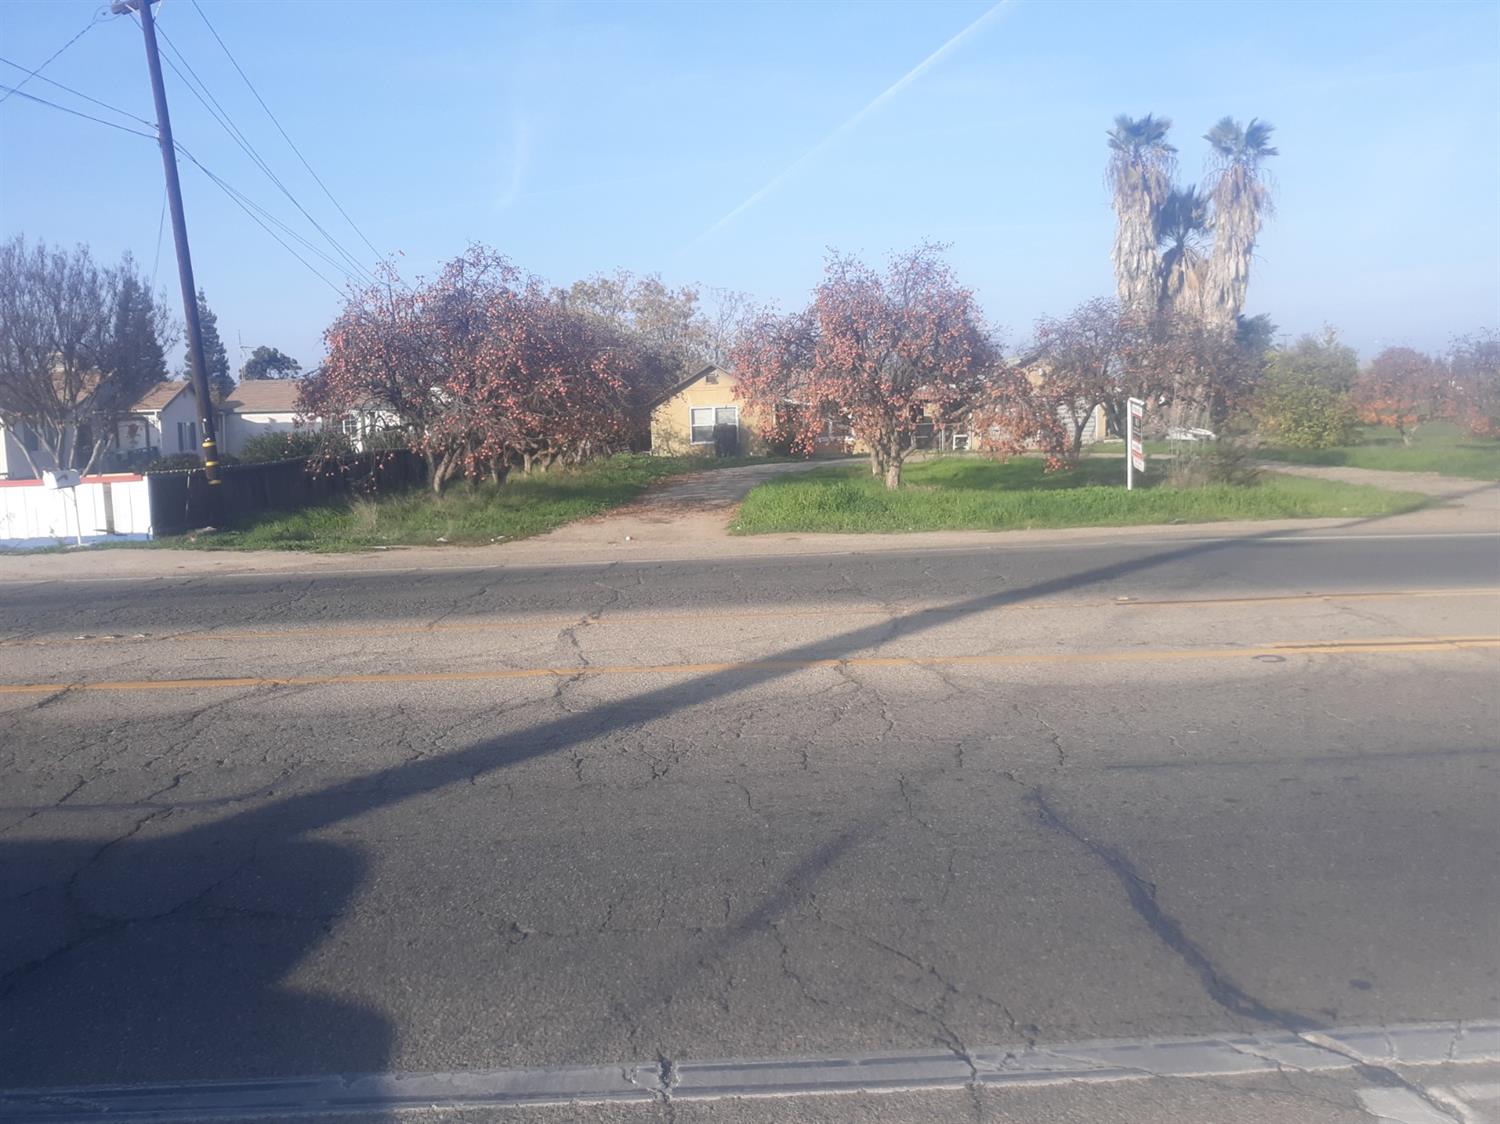 Fantastic commercial/multi-family opportunity in Reedley. 1.01+ acres, has a well and septic. Home is being rented for $500 a month, but has little value. Value is in the land. City is in need of low income housing and apartments. Owner may carry.